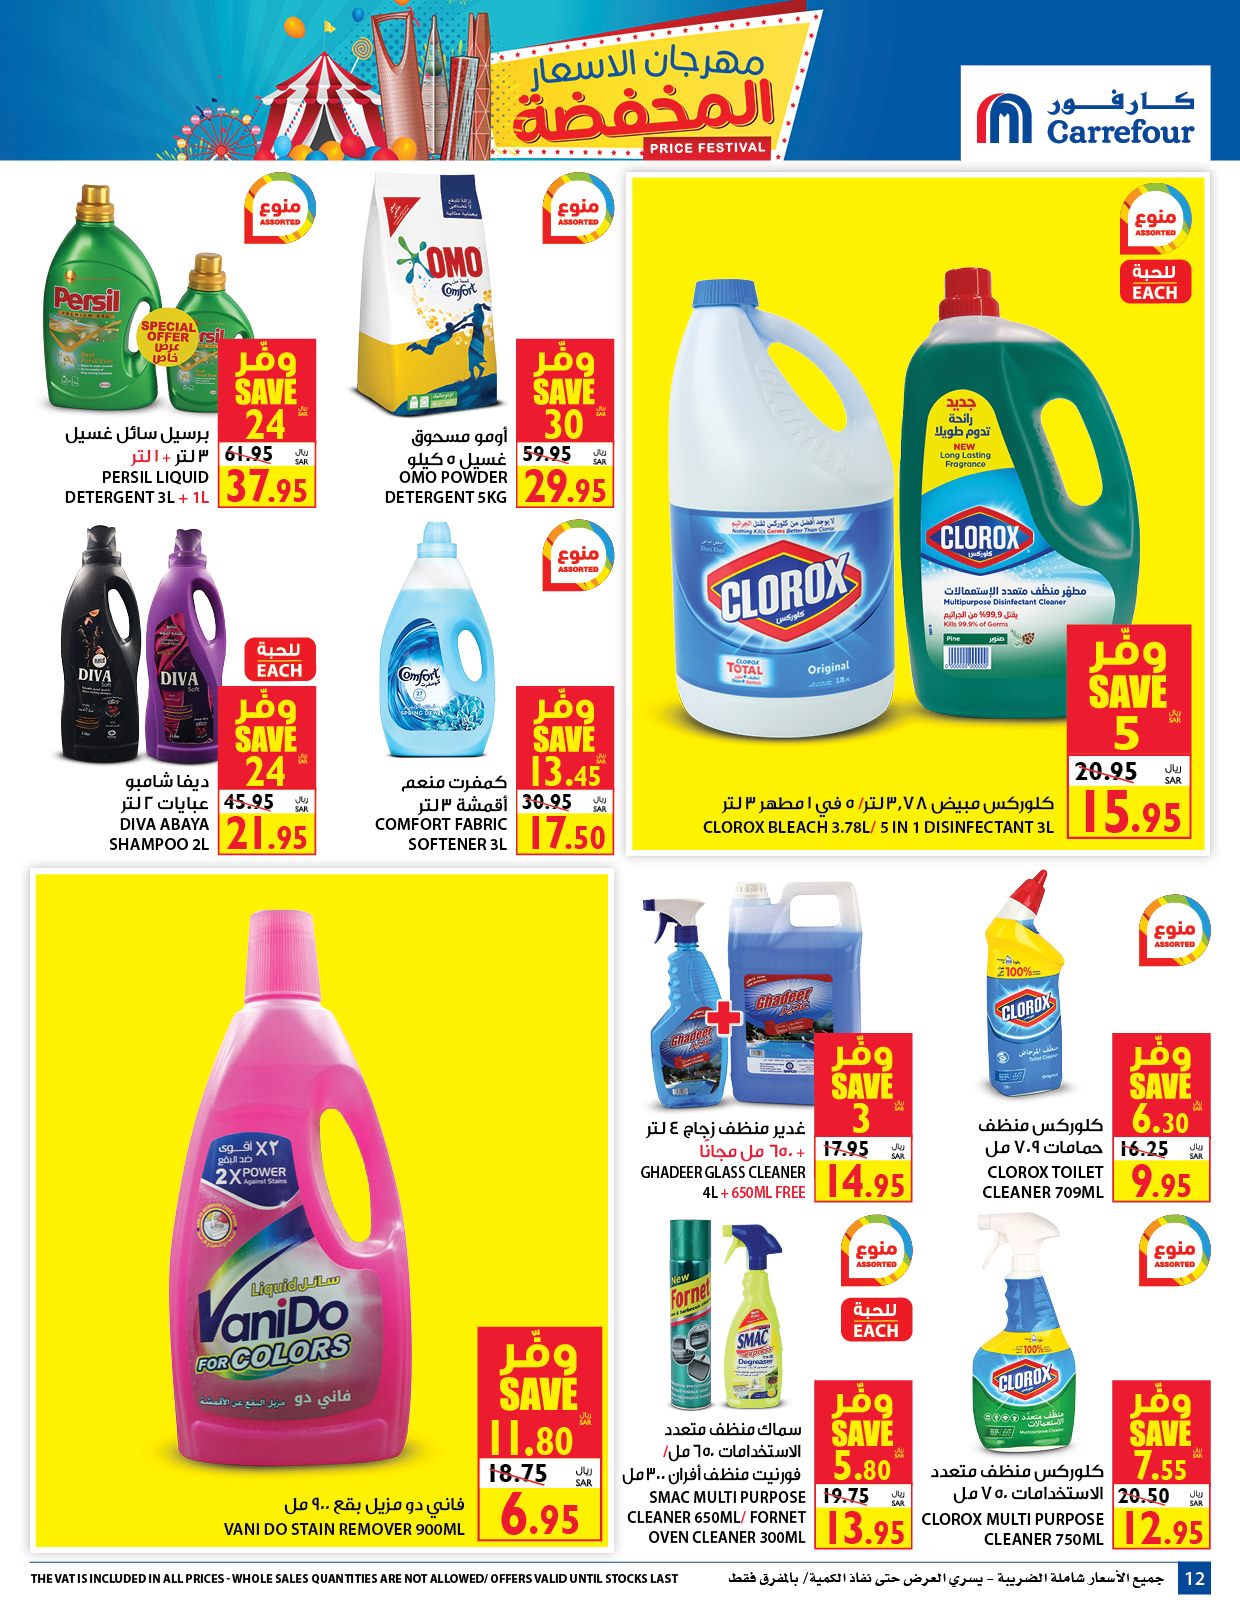 Carrefour Festival Offers from 12/8 till 25/8 | Carrefour KSA 13